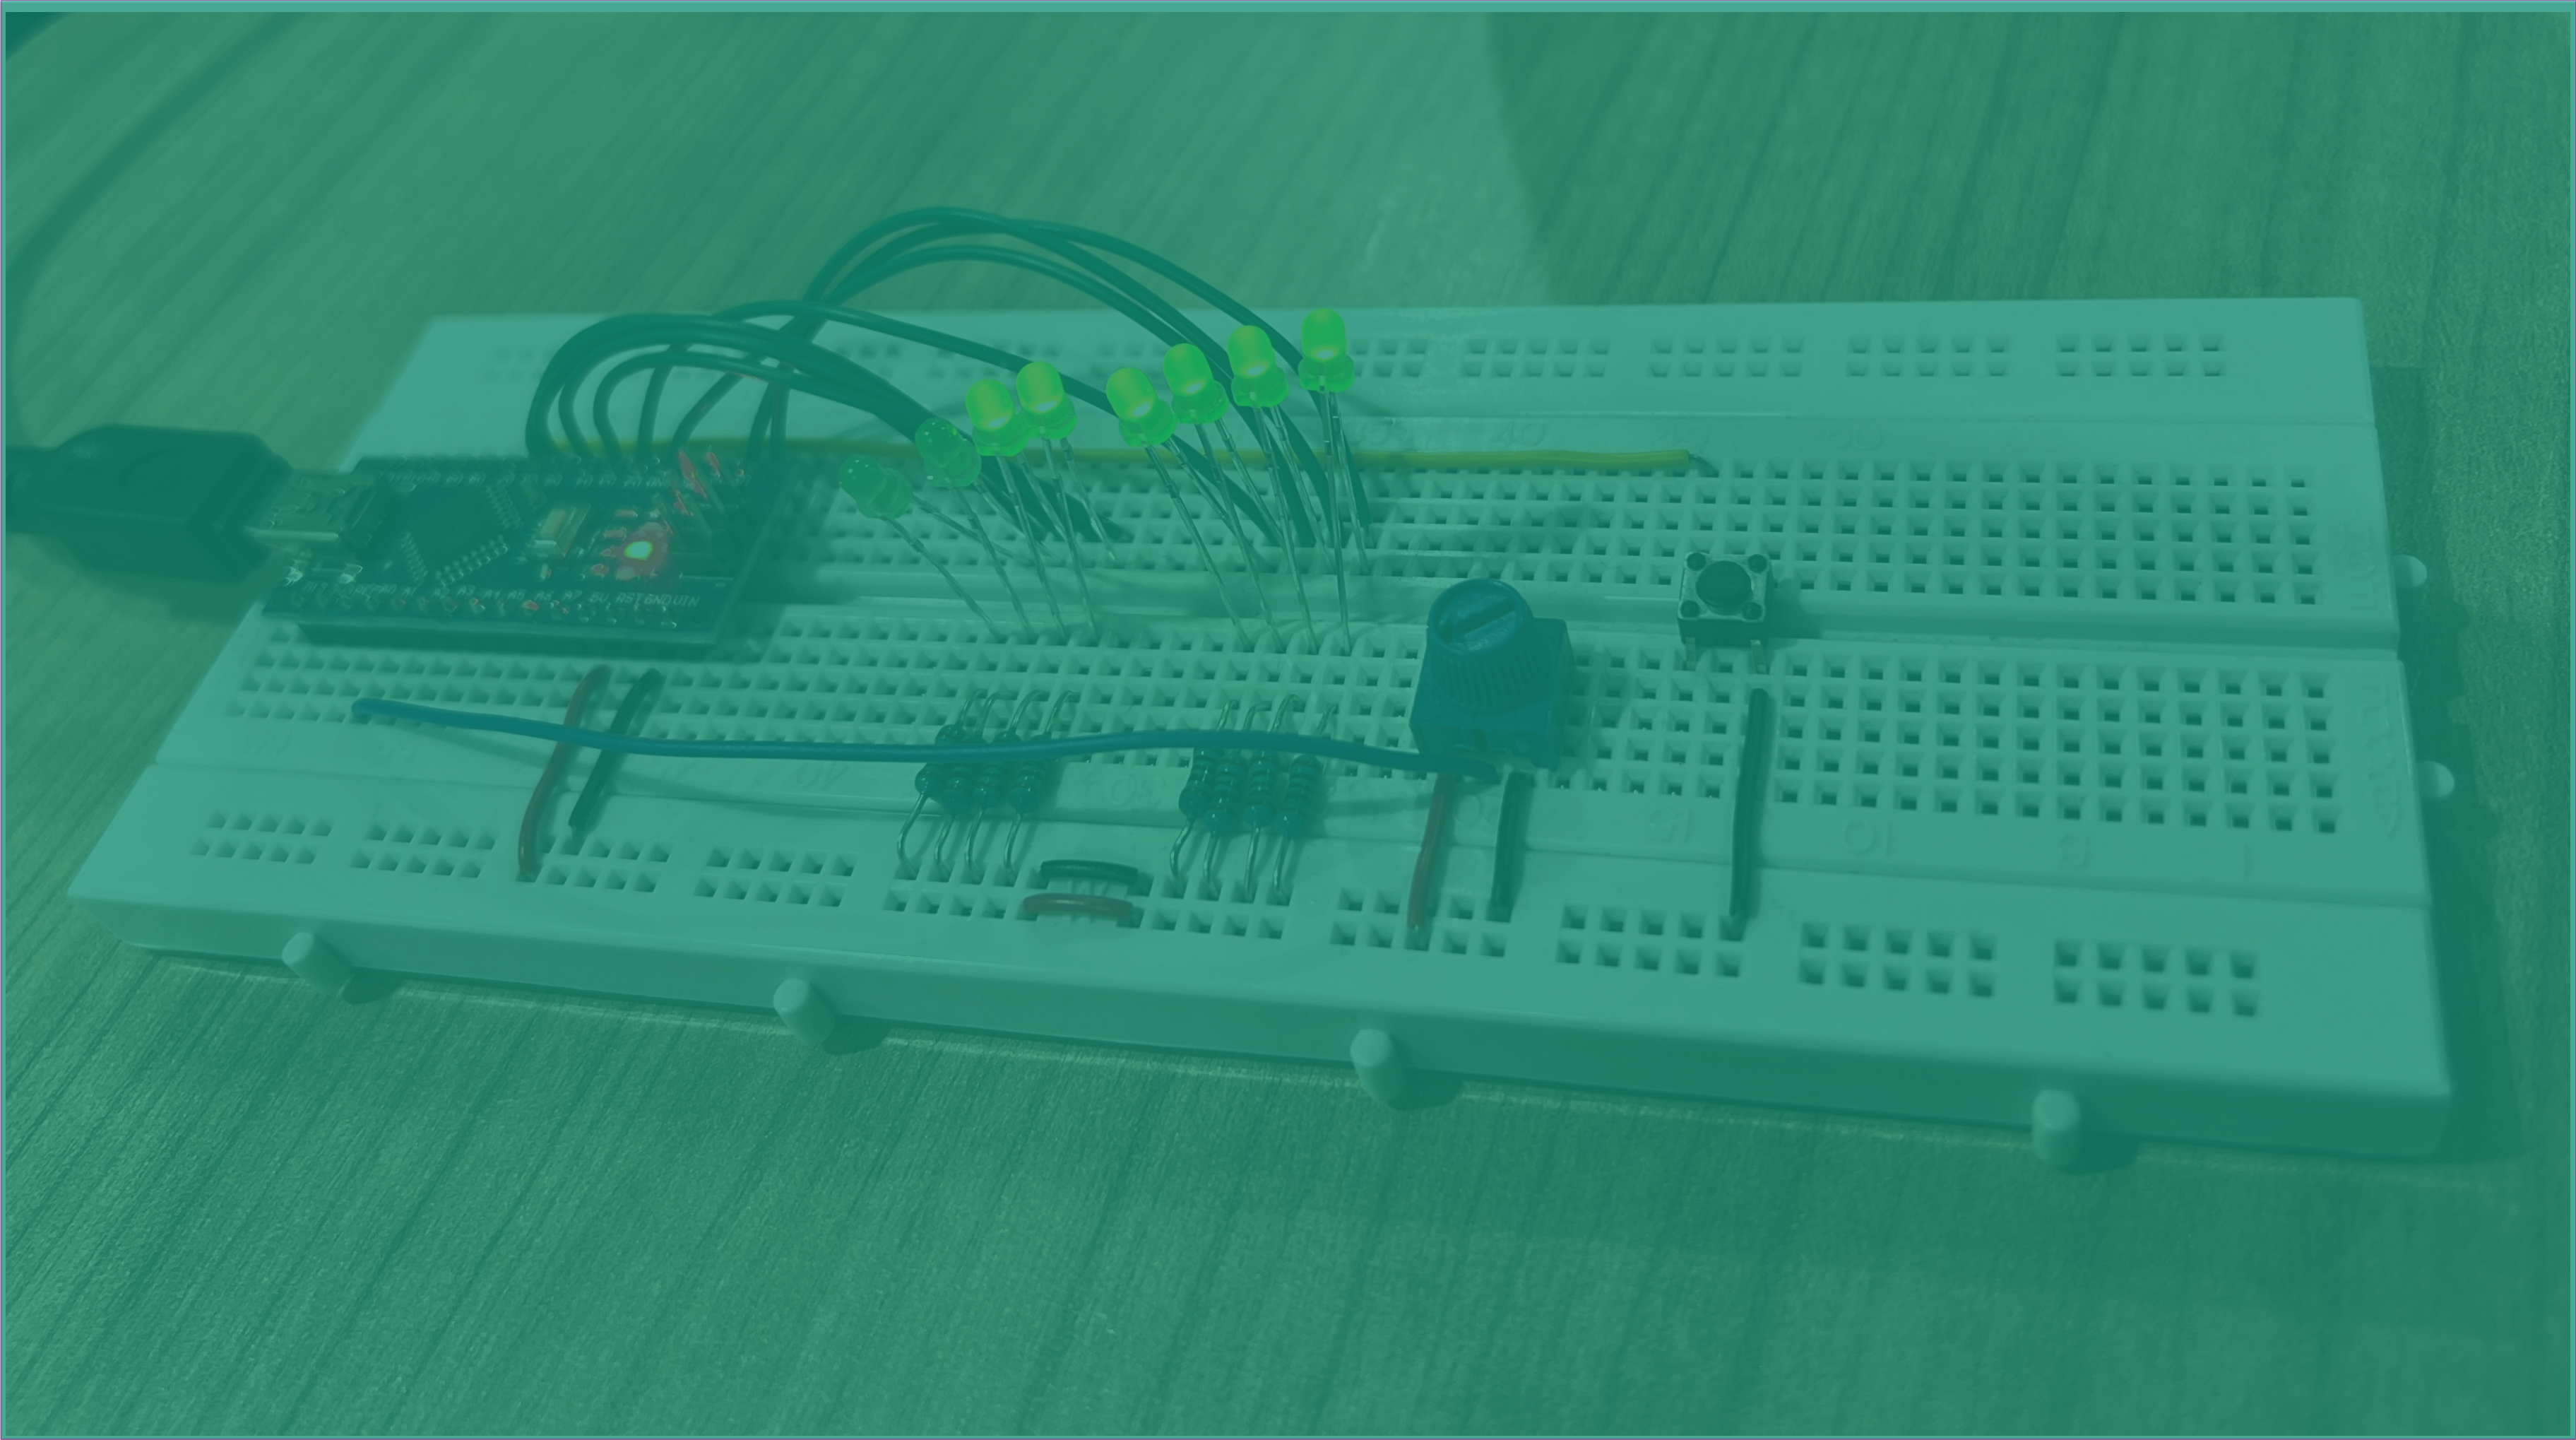 Decorative image showing a protopype ADC application for the Arduino nano